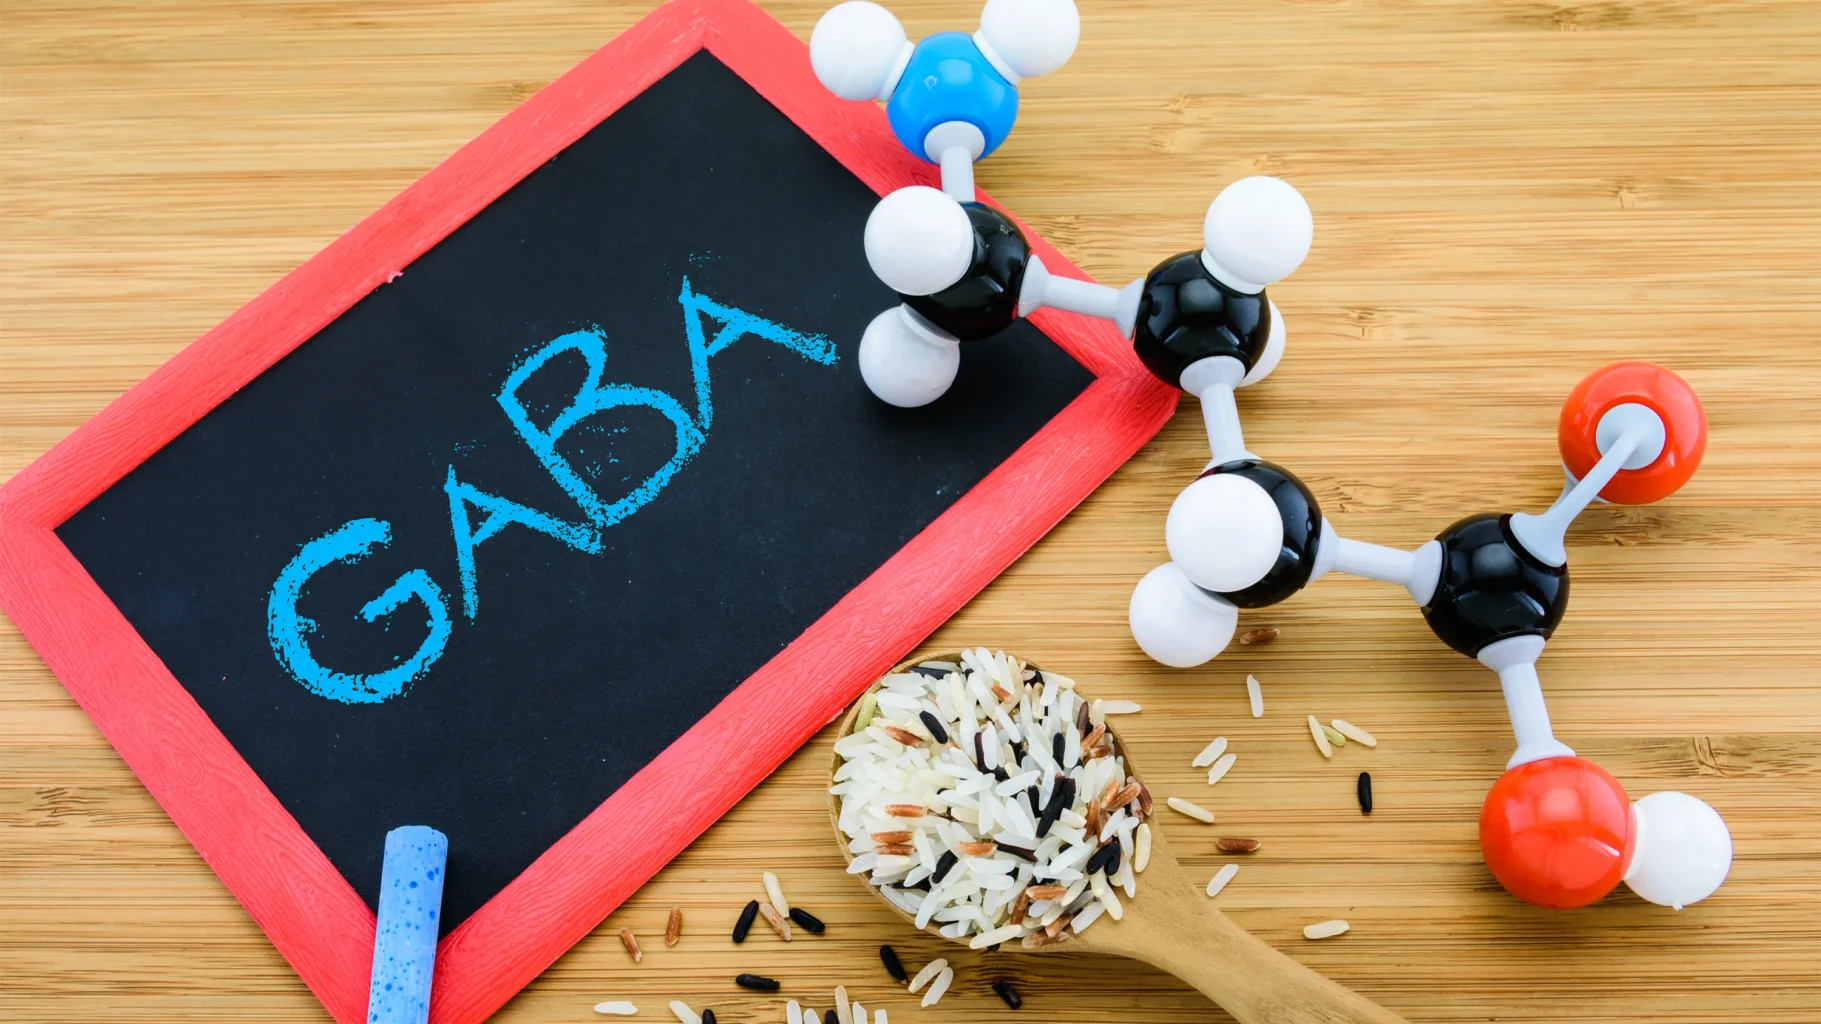 GABA is known for its calming effects on the nervous system,